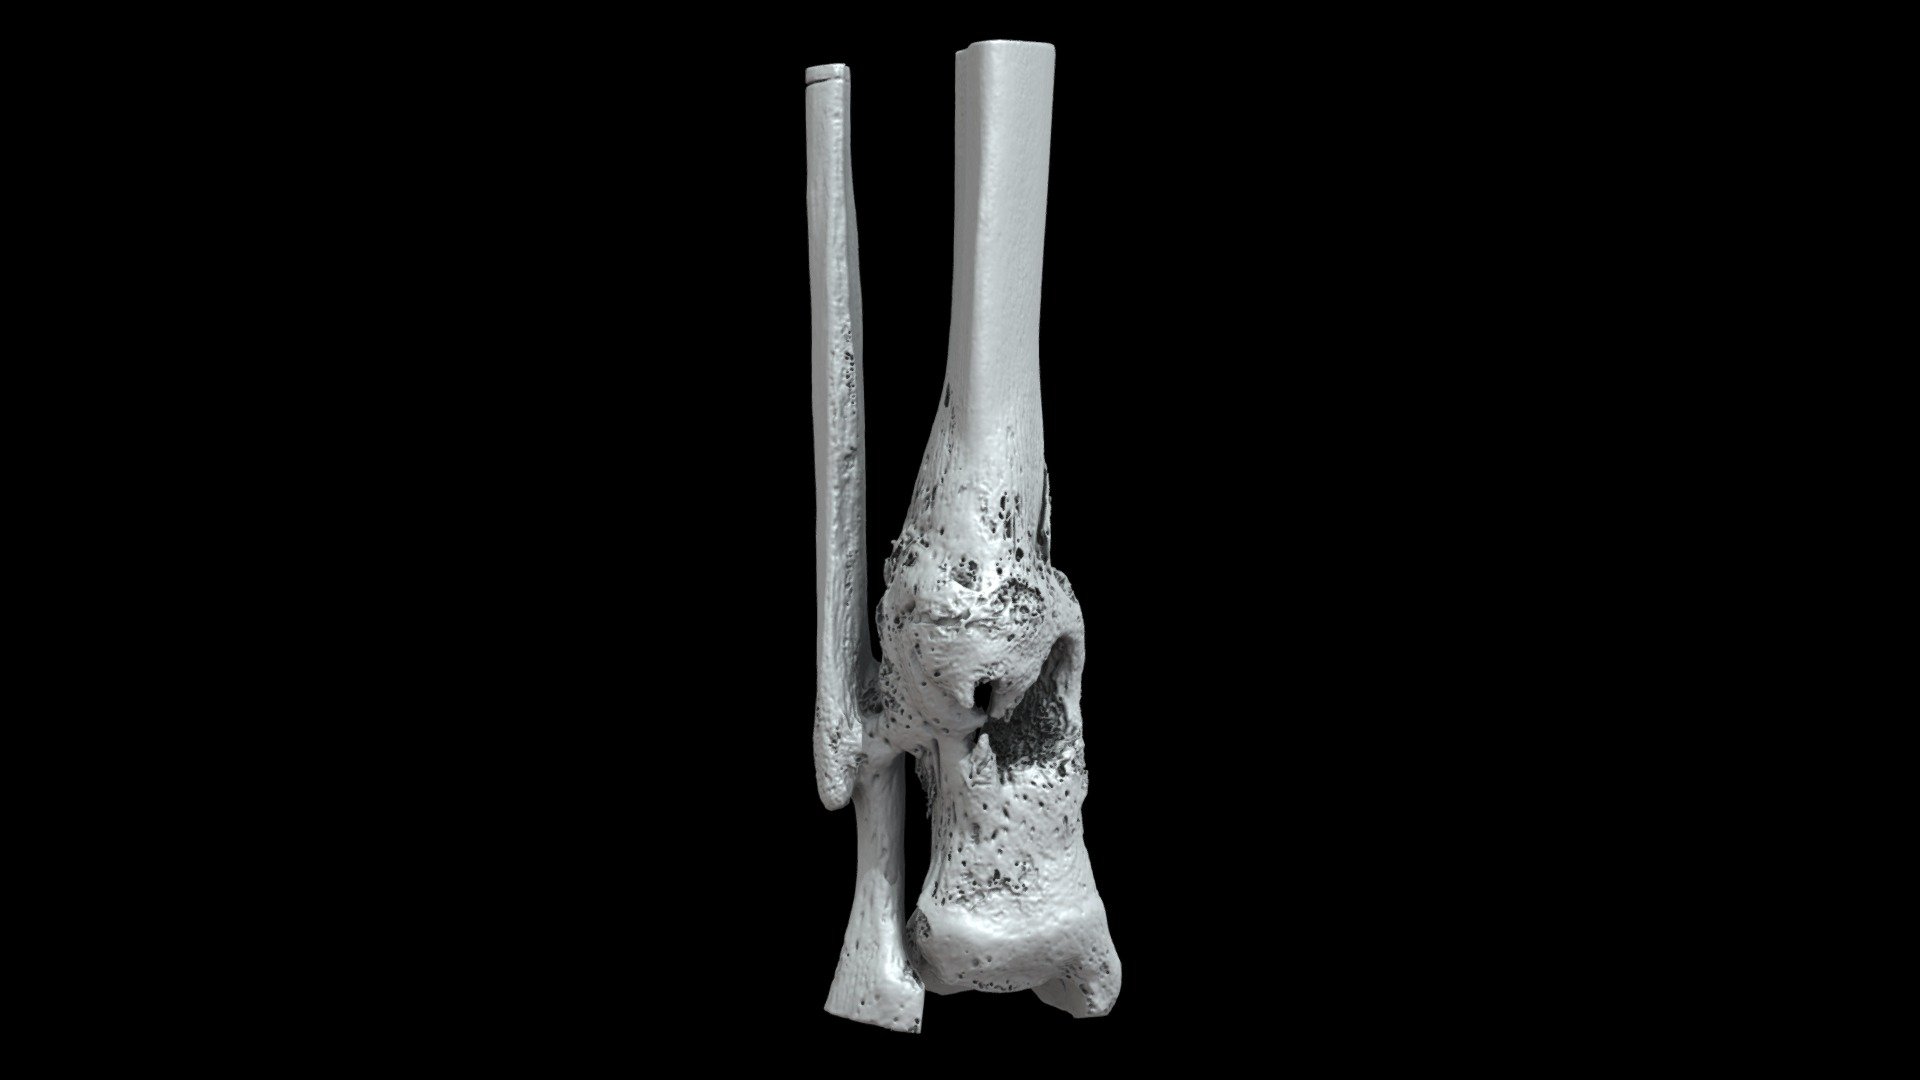 Right distal tibia/fibula with osteomyelitis/healed fracture from the American Civil War; patient William Holmes Co. D 18th Massachusetts, injured at Fredericksburg, VA Dec 13, 1862. Specimen AFIP 1002694 from the National Museum of Health and Medicine (Silver Spring, MD).

Model generated with the Segment Editor in 3D Slicer from a micro-computed tomography scan. 3D models can be downloaded from Morphosource at: https://www.morphosource.org/Detail/SpecimenDetail/Show/specimen_id/31978.

Model generated by Terrie Simmons-Ehrhardt 3d model